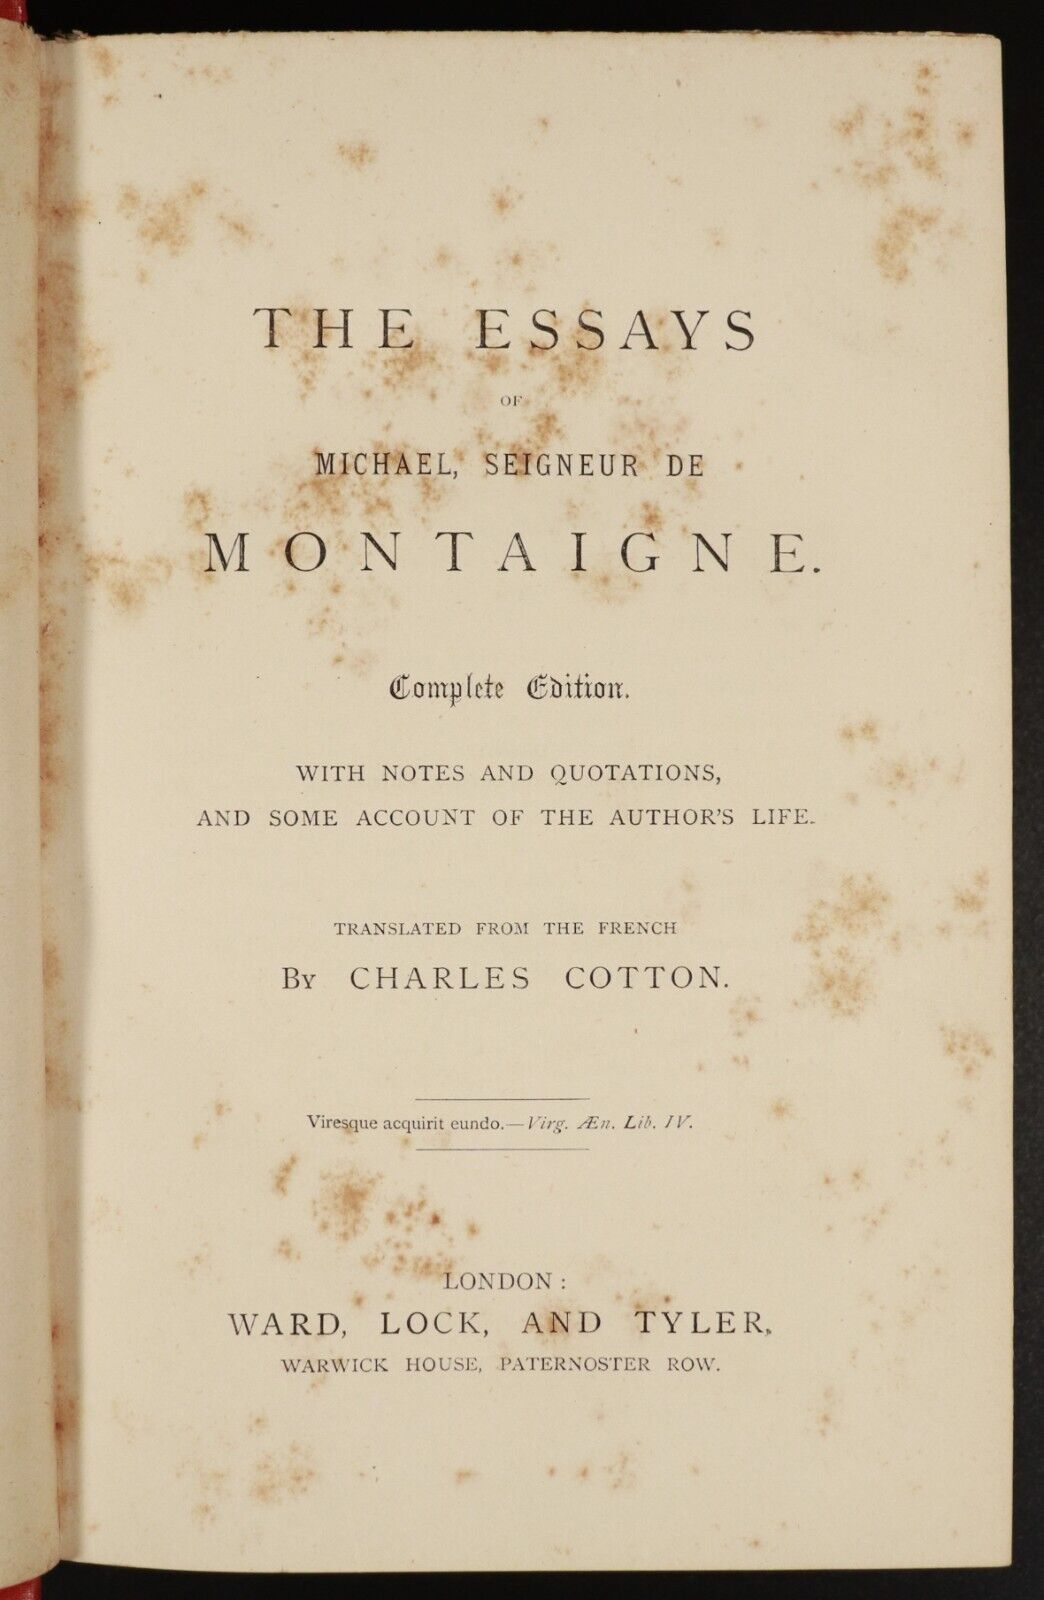 c1870 Montaigne's Essays Translated by C. Cotton Antiquarian Philosophy Book - 0